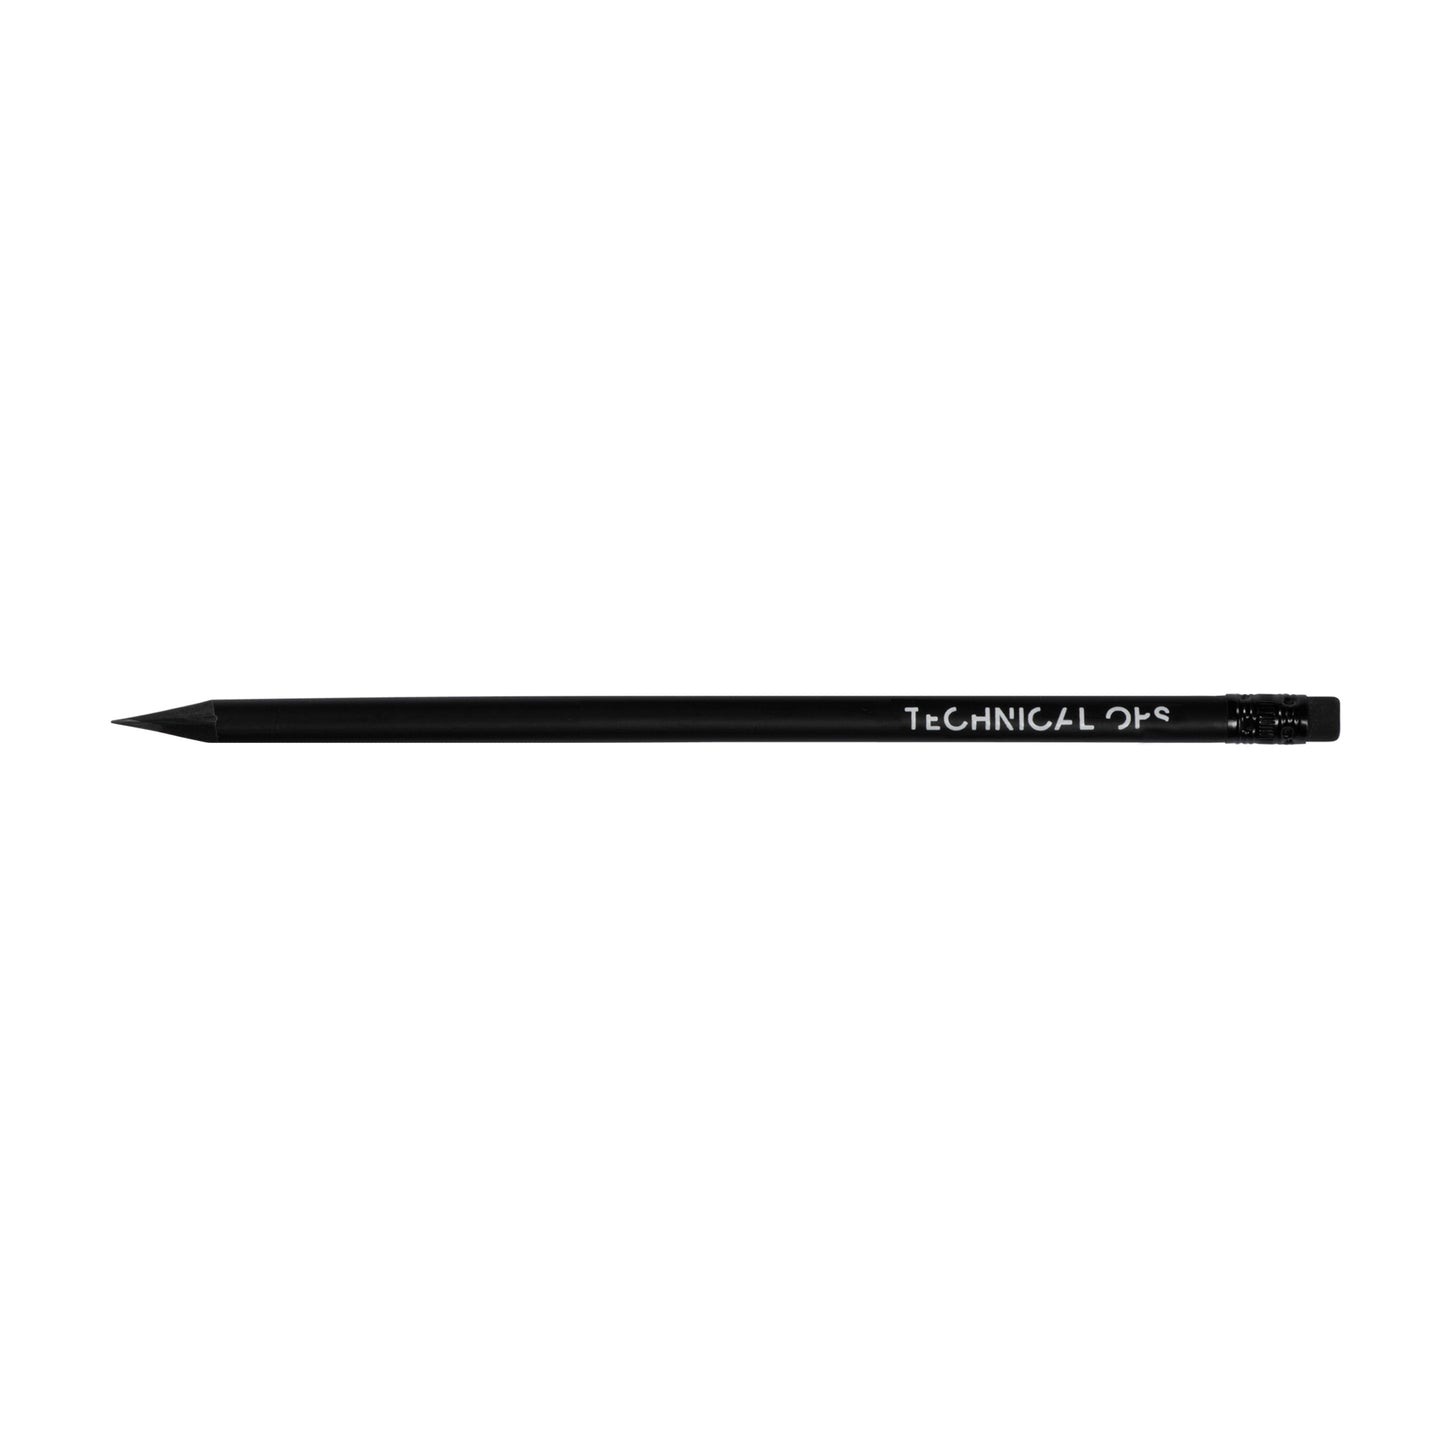 SPYSCAPE Technical Ops Pencil - 